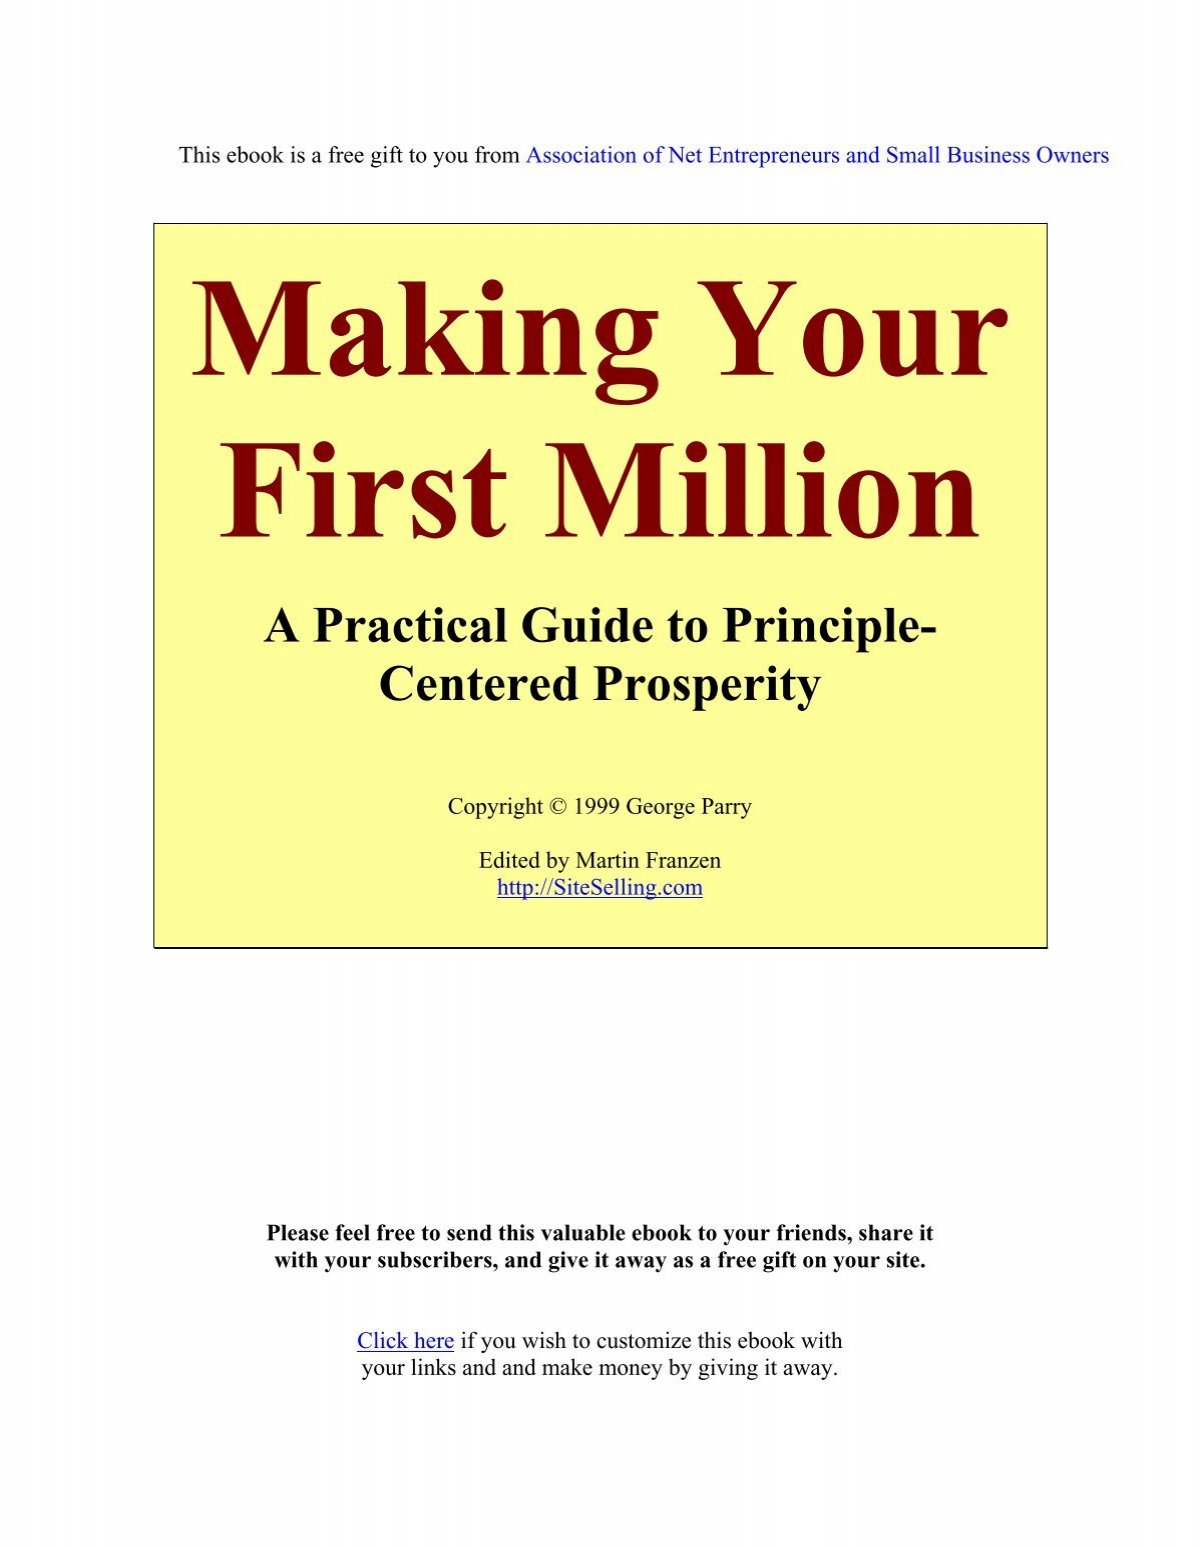 Making Your First Million.pdf - Association of Net Entrepreneurs and